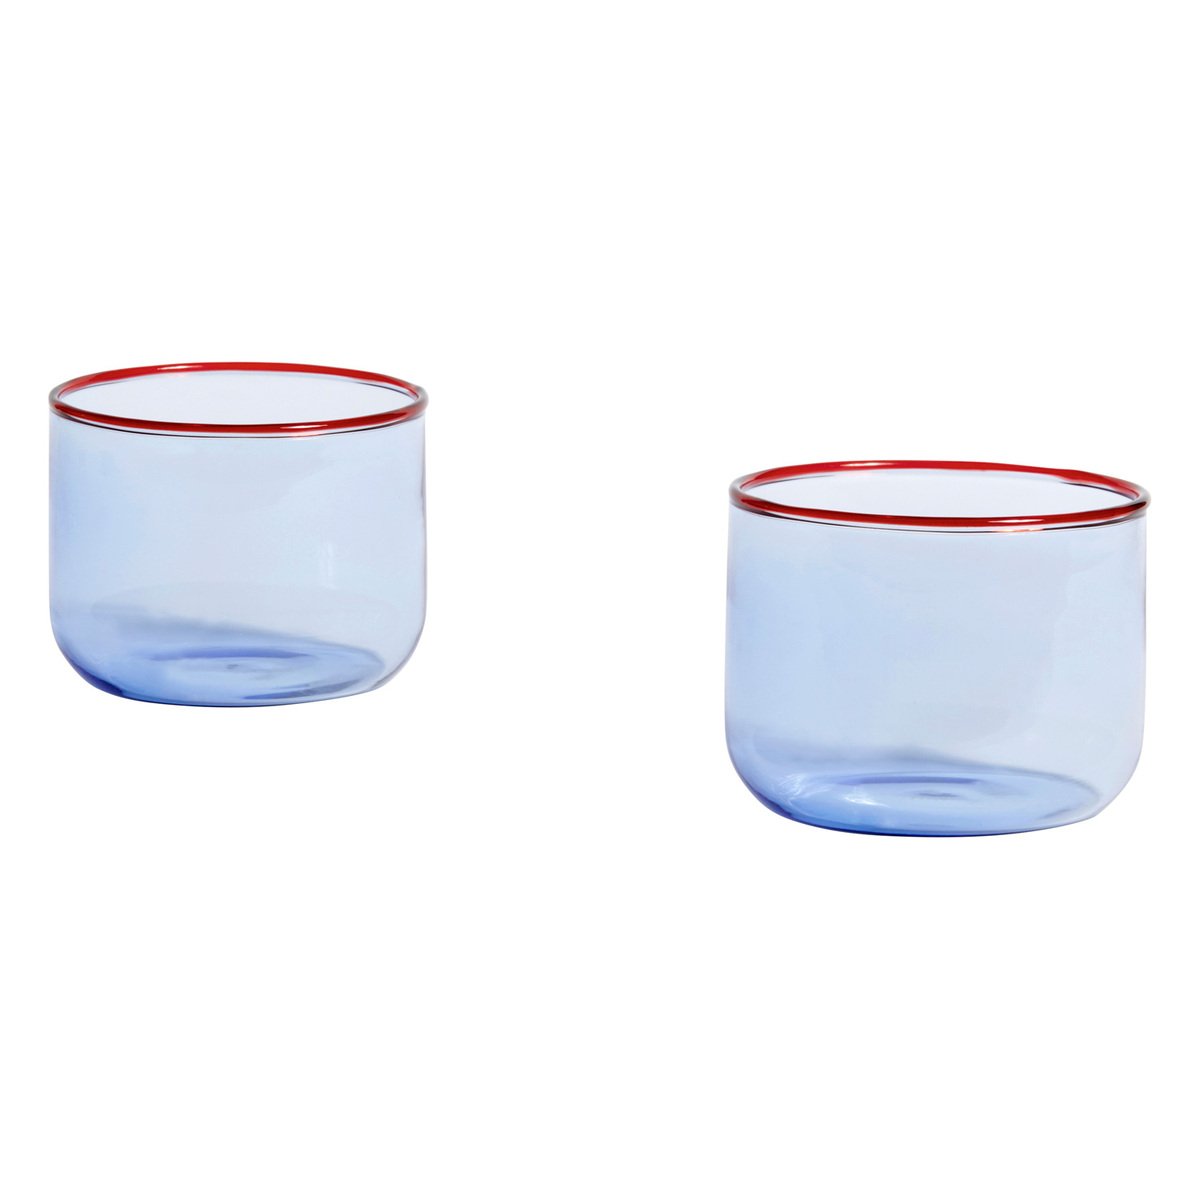 https://media.fds.fi/product_image/HA541227_Tint-Glass-Set-of-2_light-blue-with-red-rim_EE.jpg